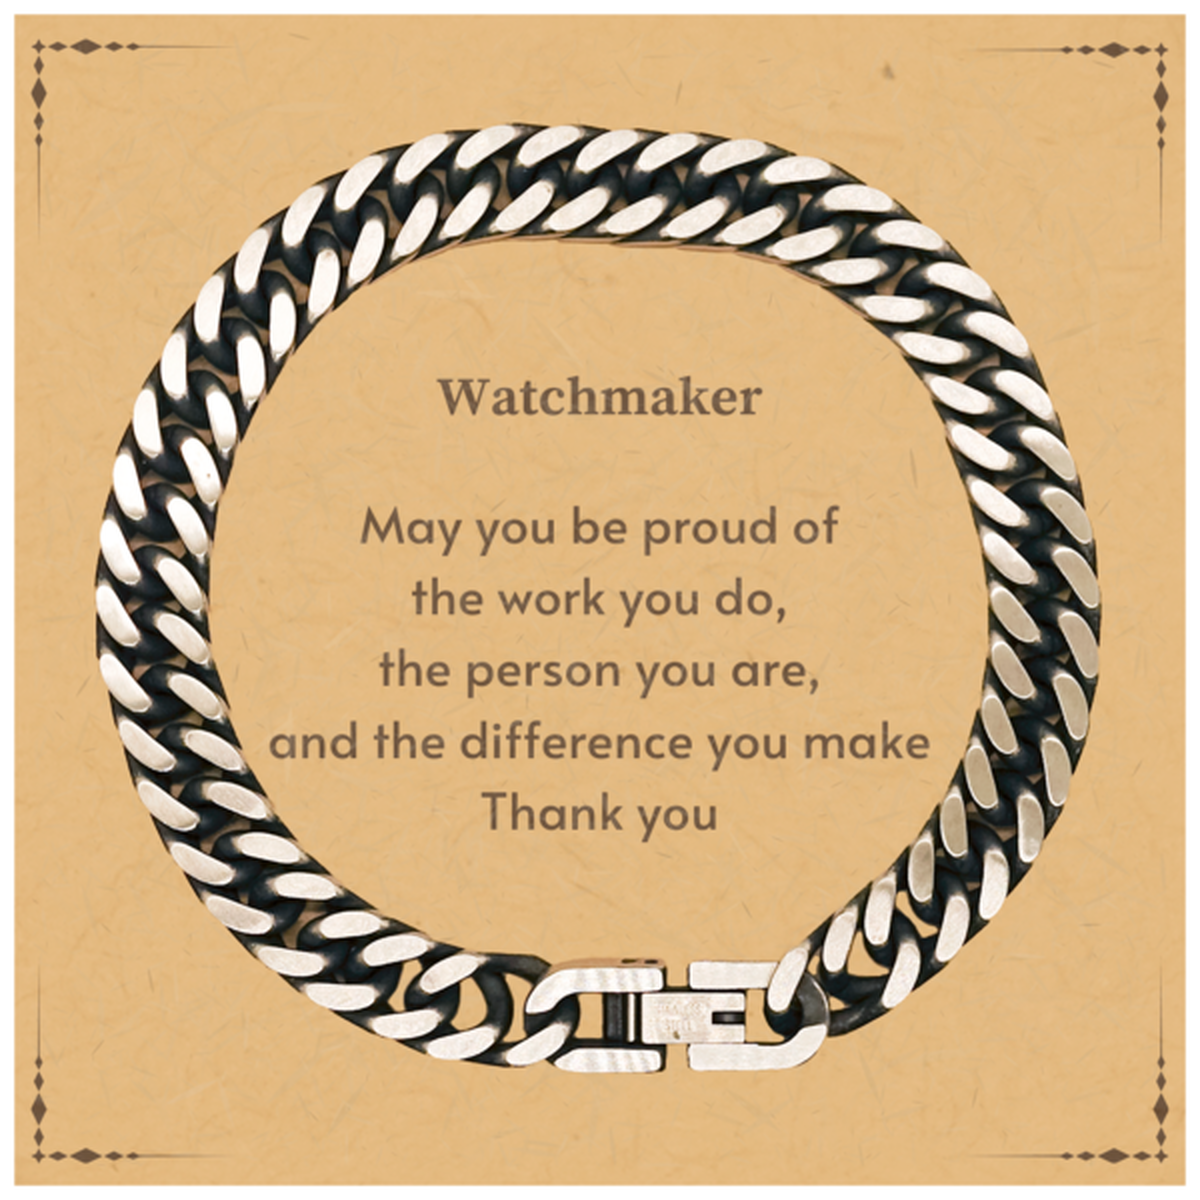 Heartwarming Cuban Link Chain Bracelet Retirement Coworkers Gifts for Watchmaker, Watchmaker May You be proud of the work you do, the person you are Gifts for Boss Men Women Friends